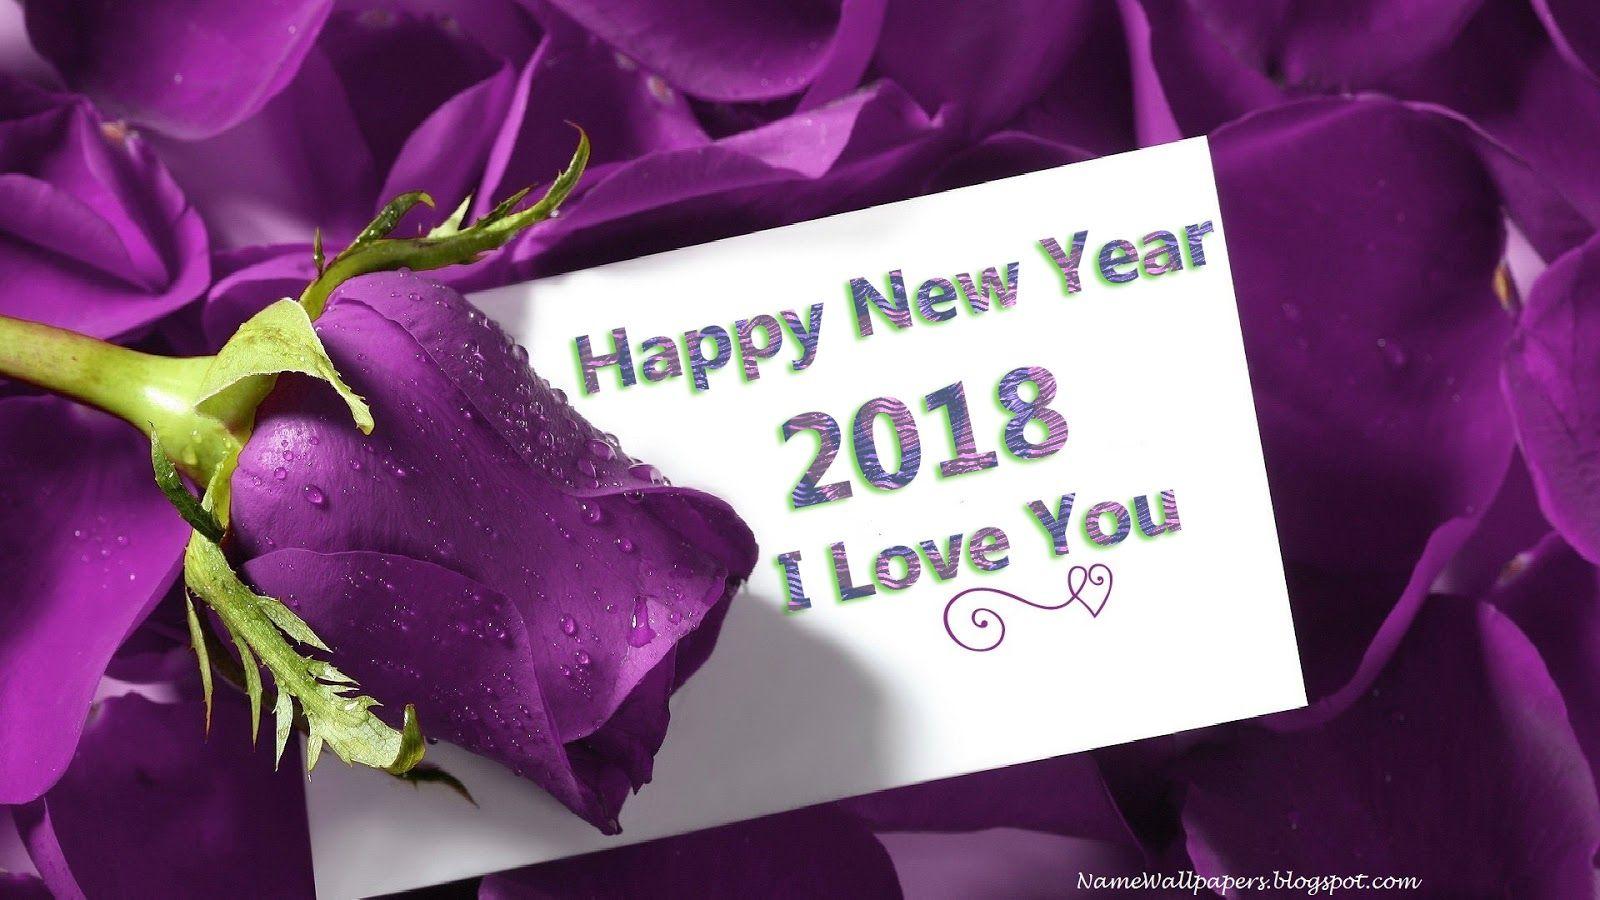 Happy New Year 2018 Wallpaper HD Free Download. Happy New Year